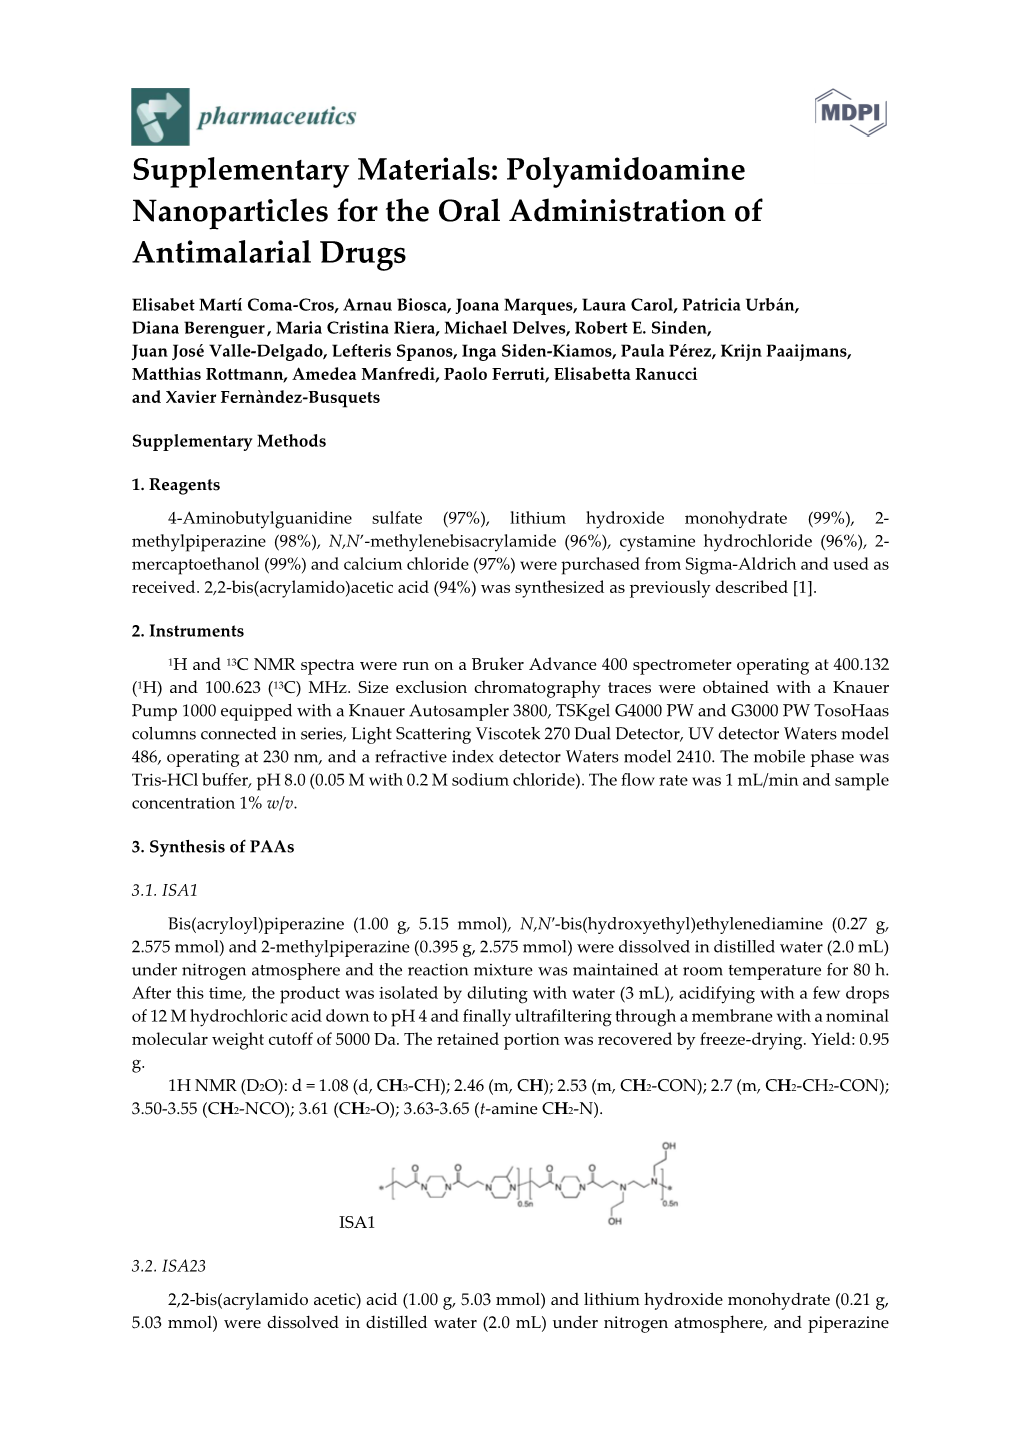 Supplementary Materials: Polyamidoamine Nanoparticles for the Oral Administration of Antimalarial Drugs